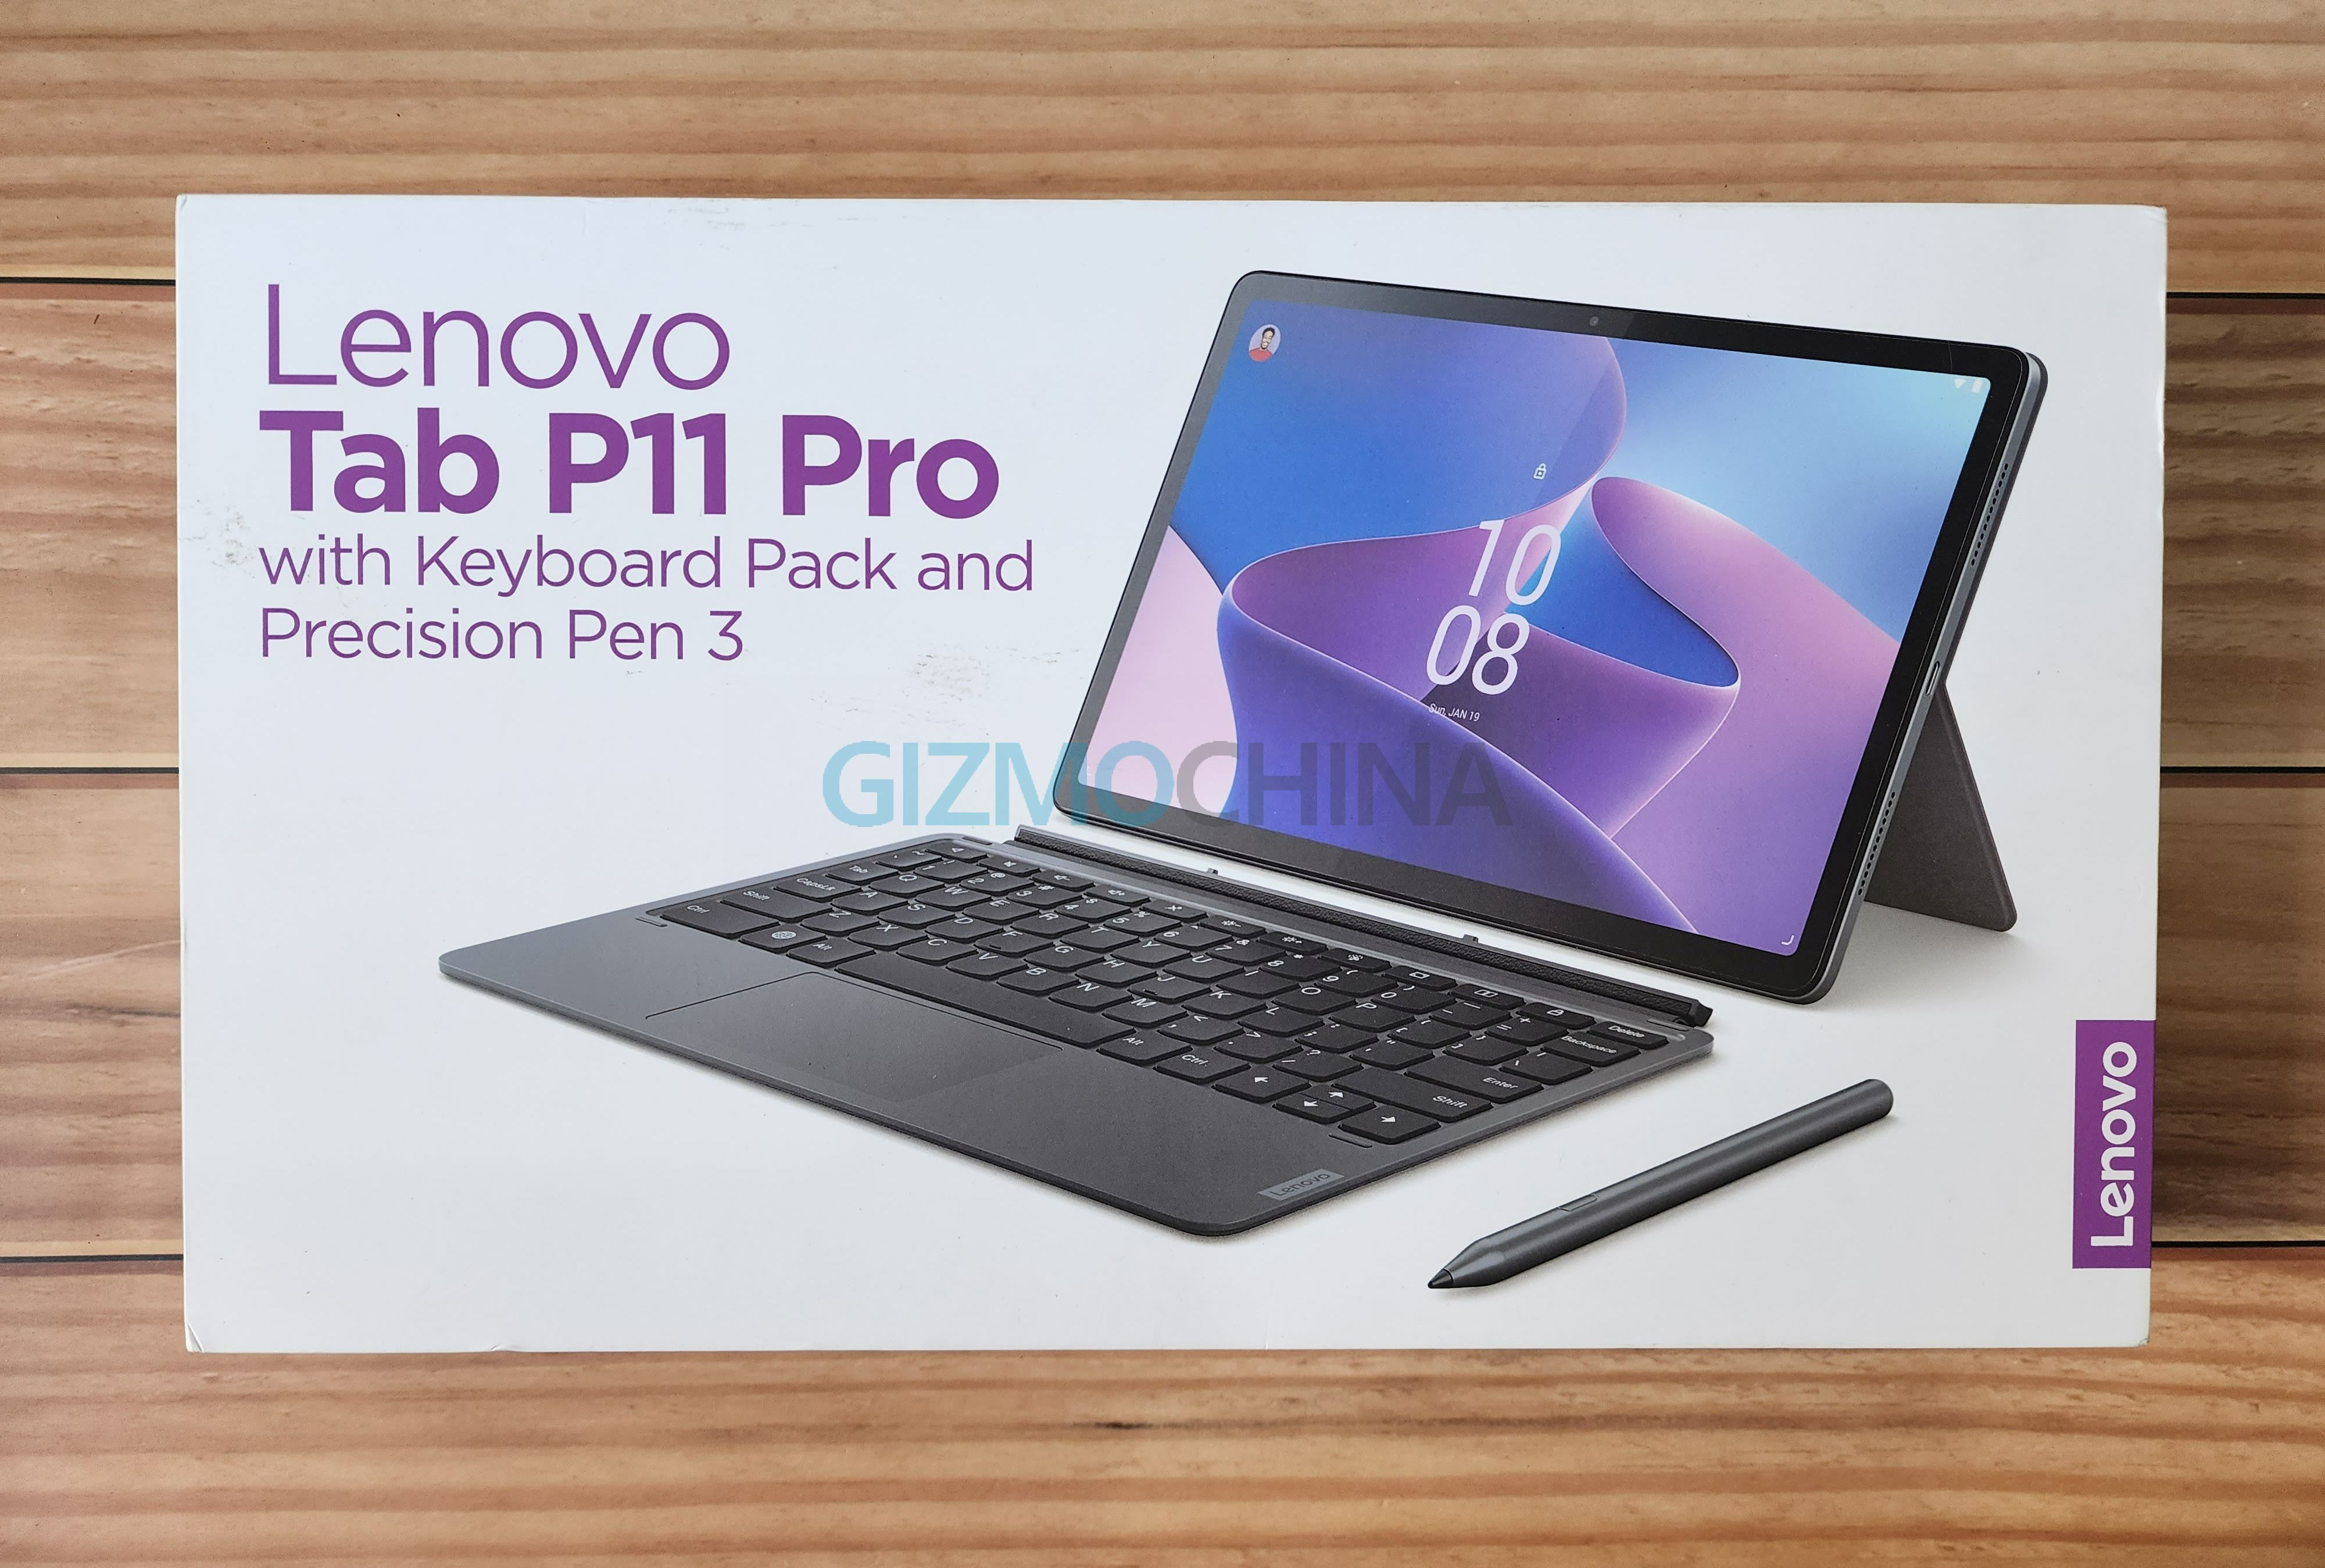 Lenovo Precision Pen (2nd Gen) only for Lenovo Tab P11 Pro Gen 2 and P12 Pro